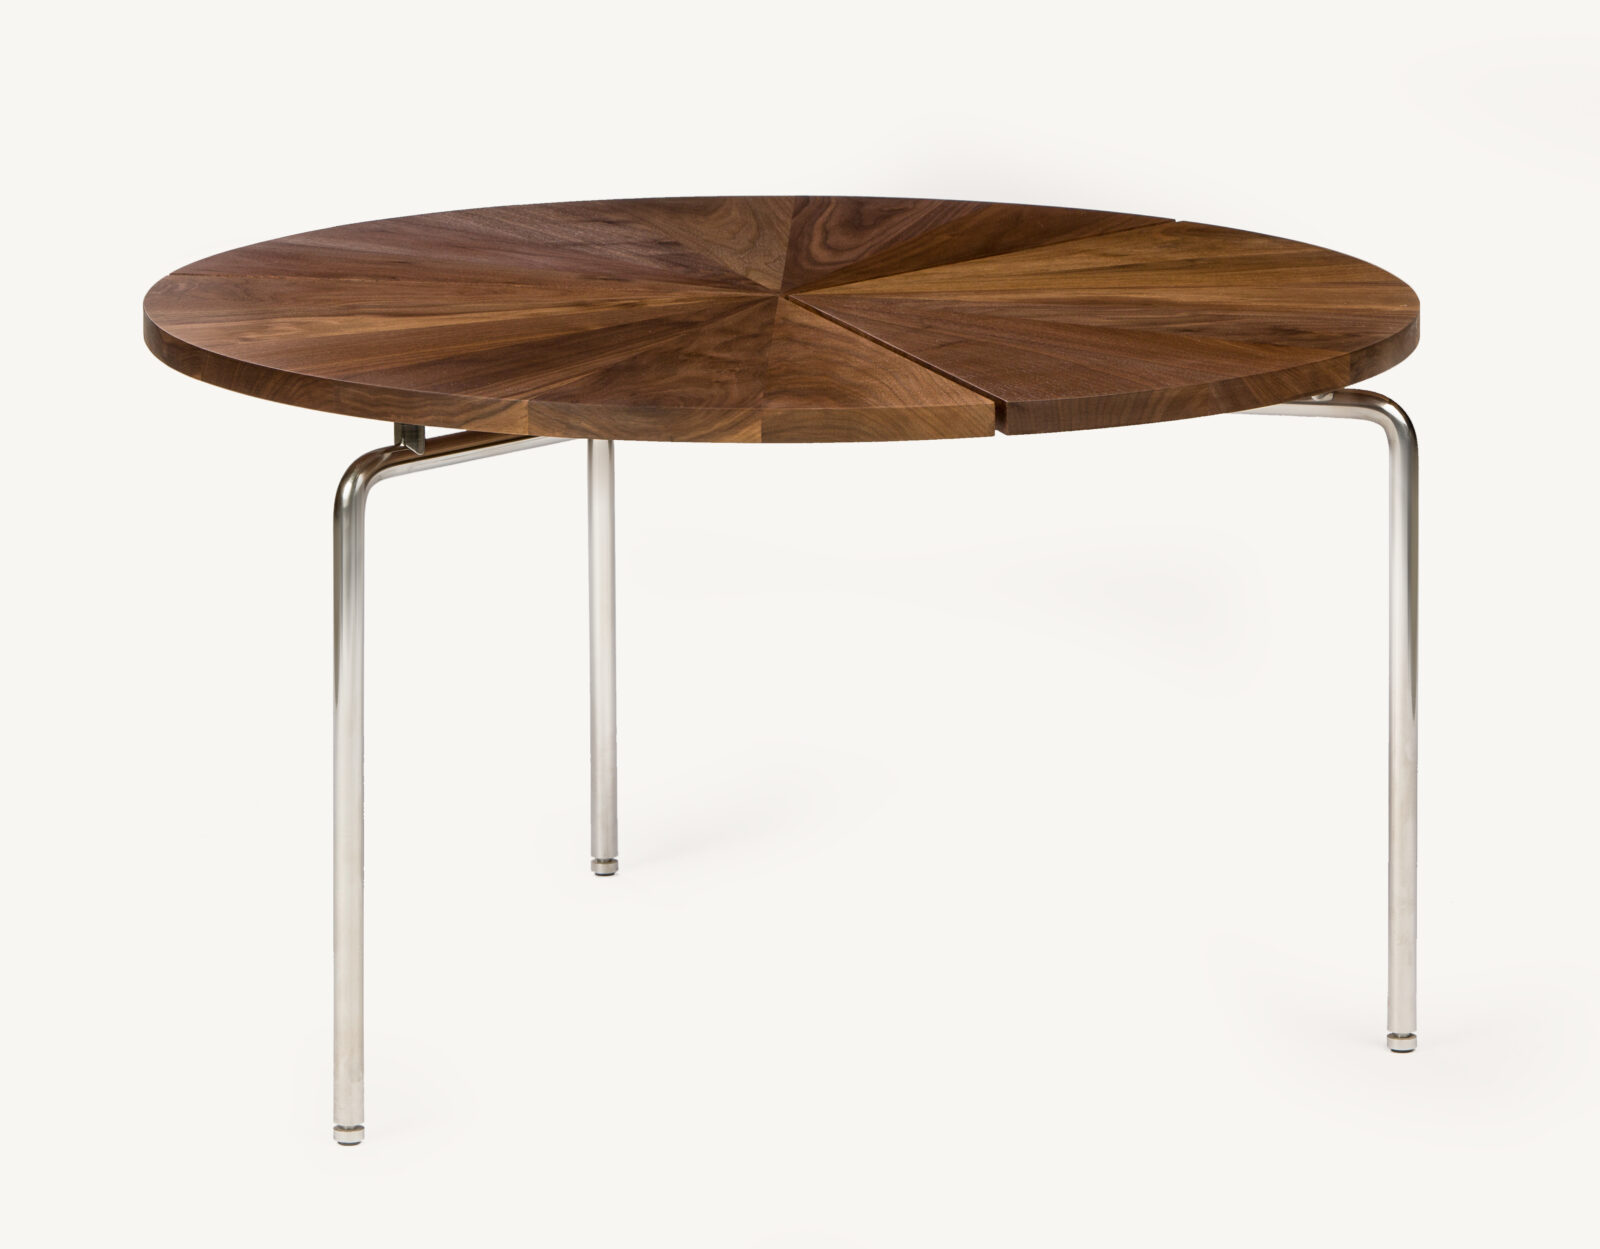 BassamFellows CB-36 Circular Coffee Table in solid Walnut and polished stainless steel base, credit ELDON ZIMMERMAN